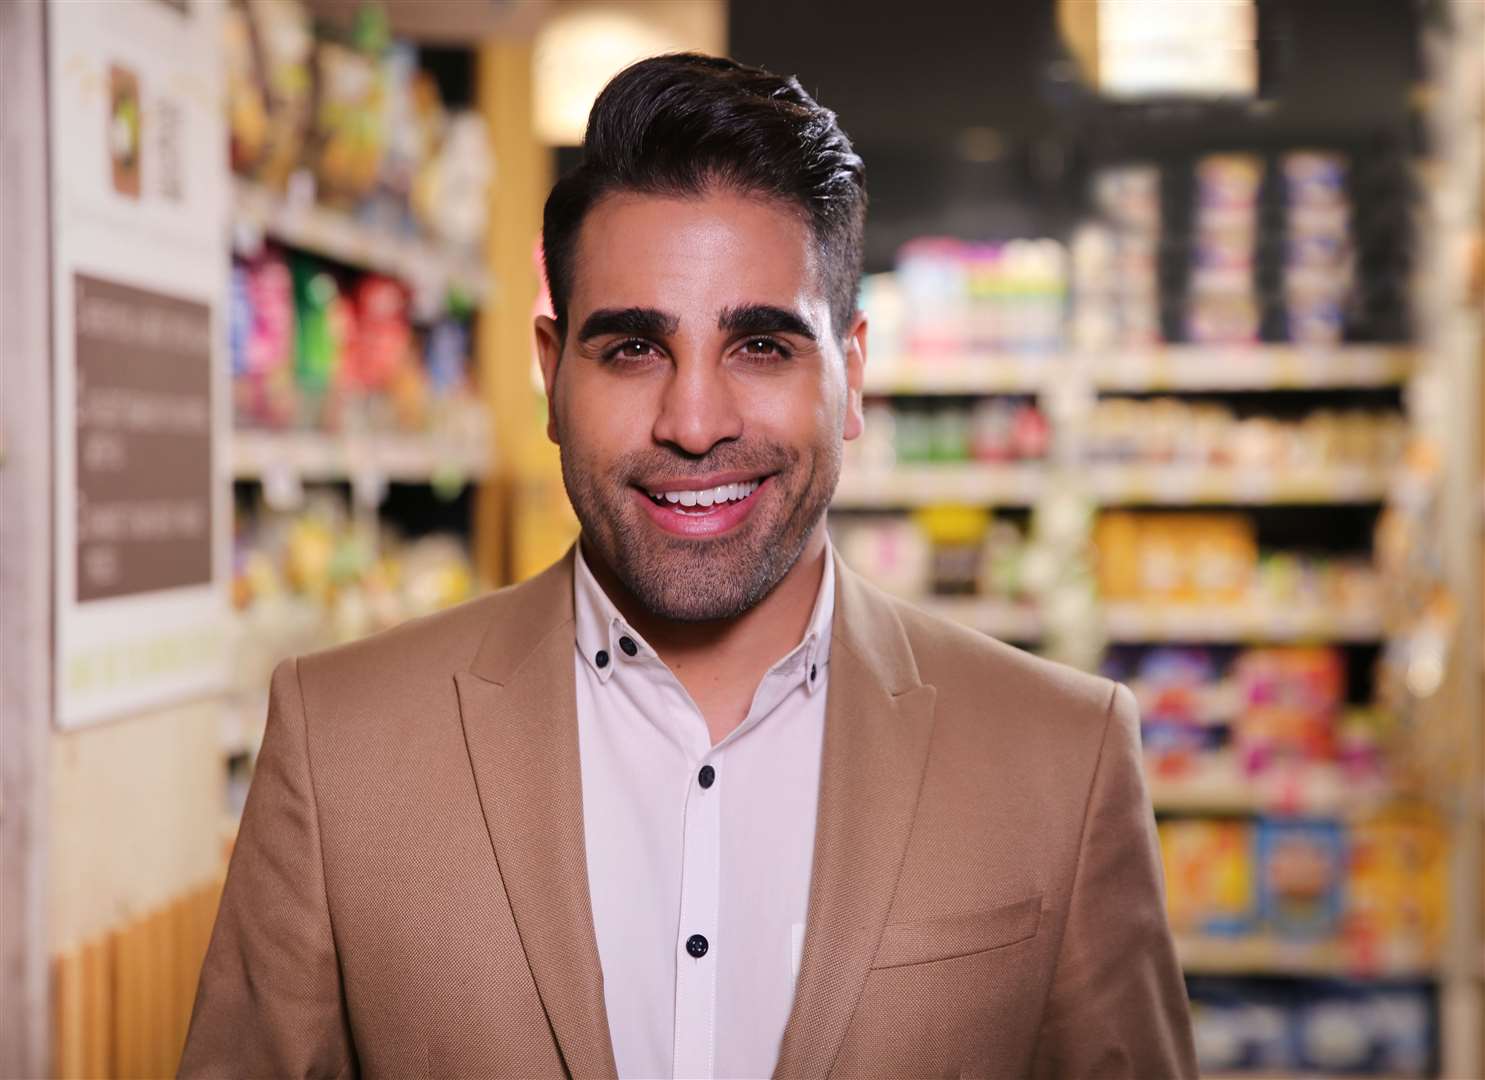 Dr Ranj. Picture credit: ITV/(C) Twofour Productions